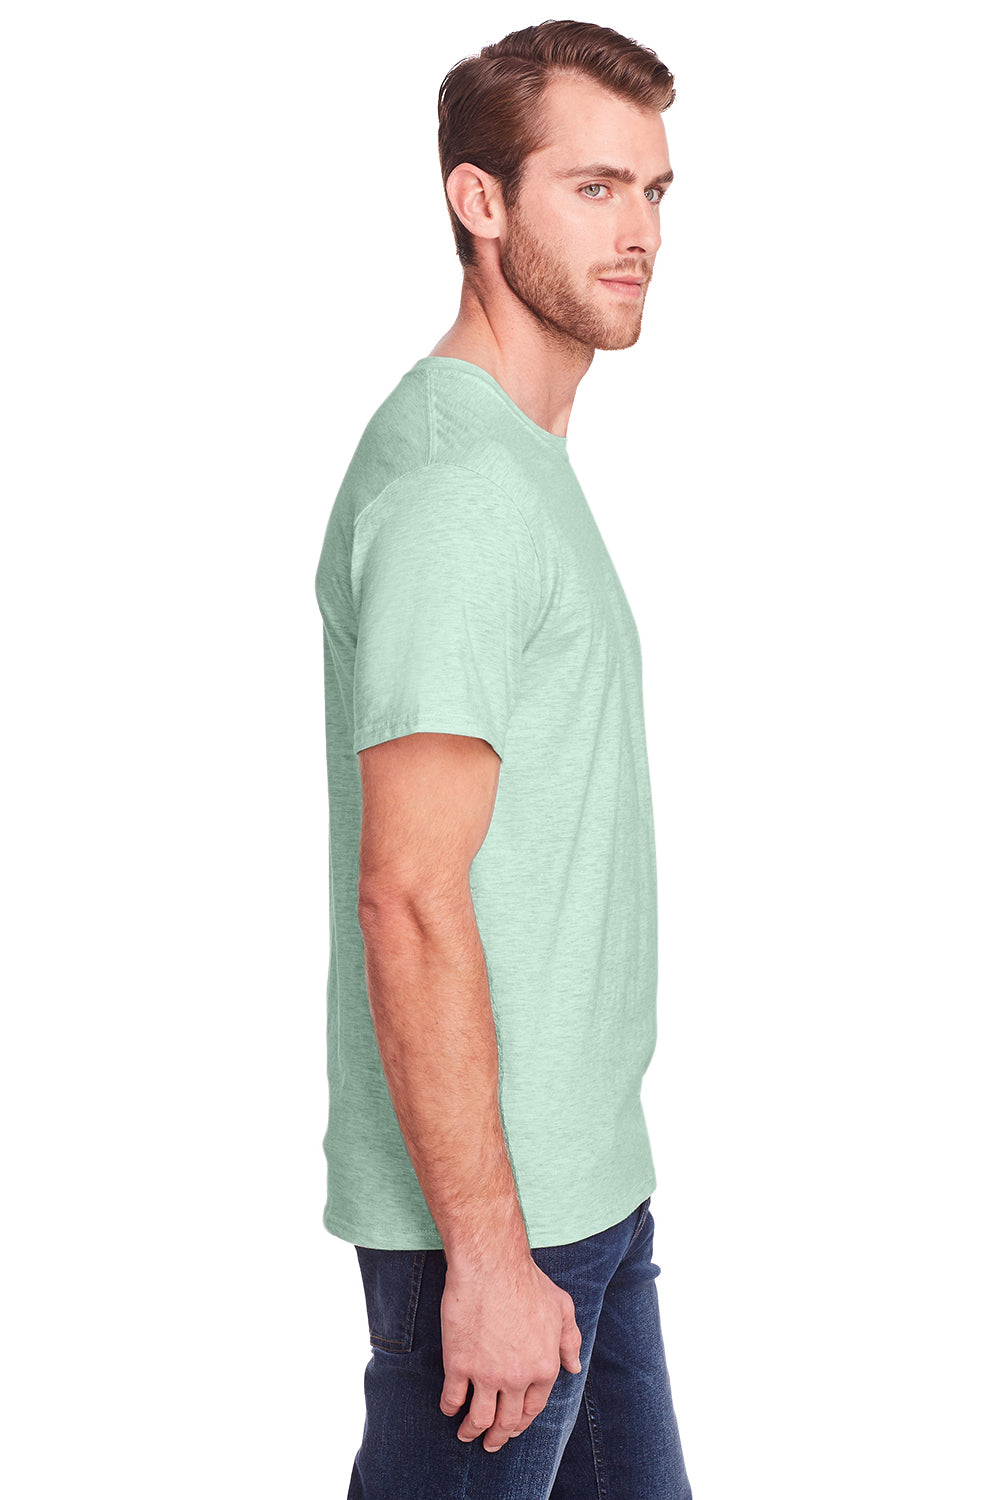 Fruit Of The Loom IC47MR Mens Iconic Short Sleeve Crewneck T-Shirt Heather Mint Green Side